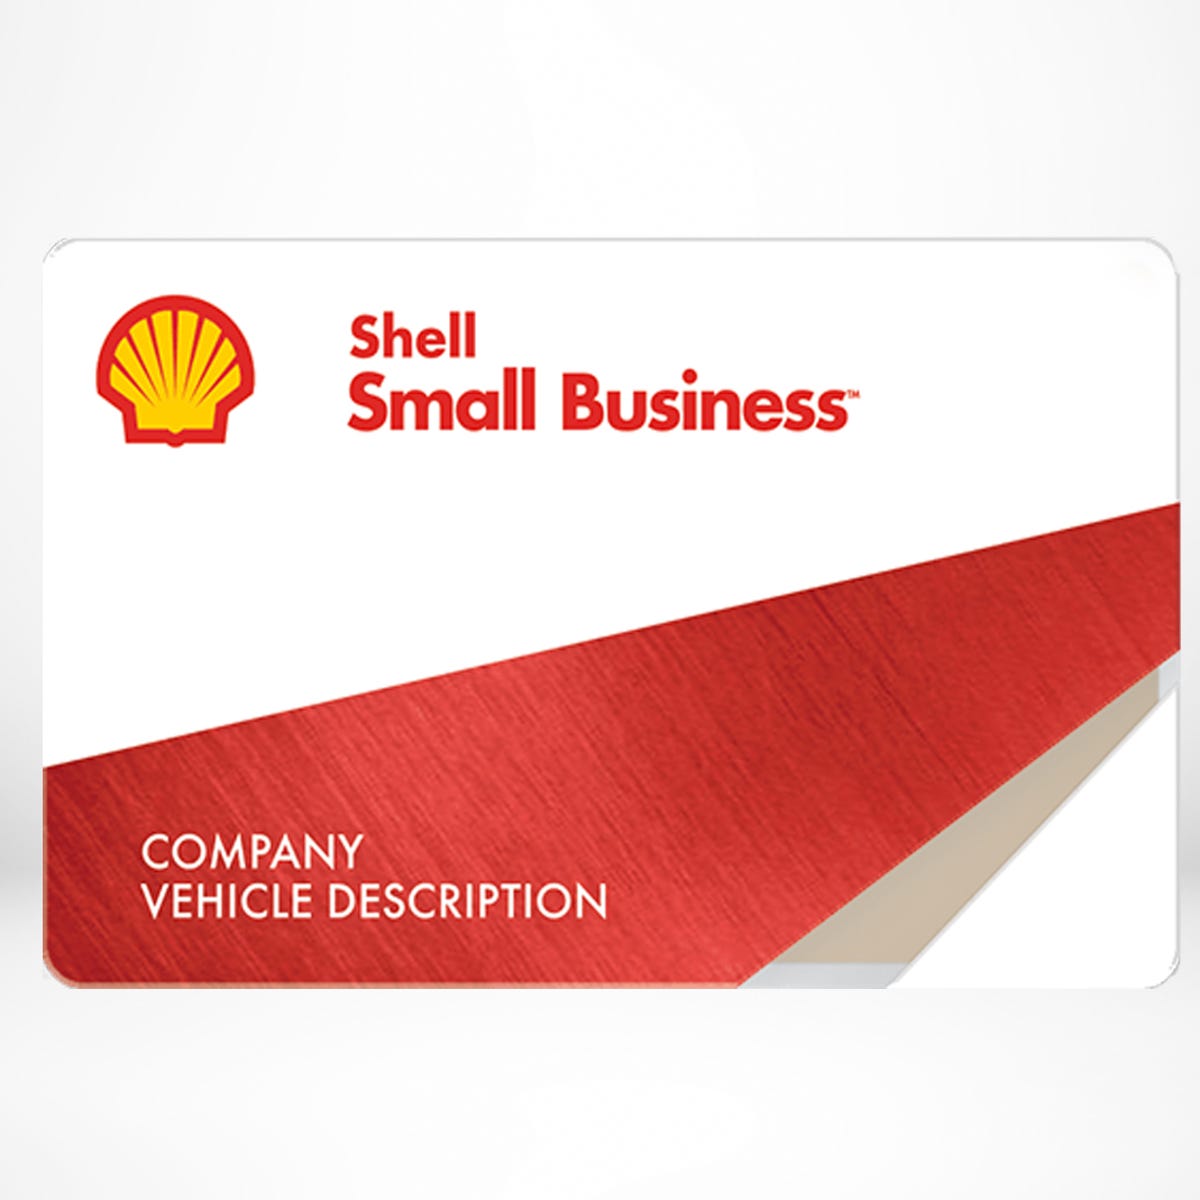 Best Gas Card 2021 Easy Approval Business Gas Cards Zdnet